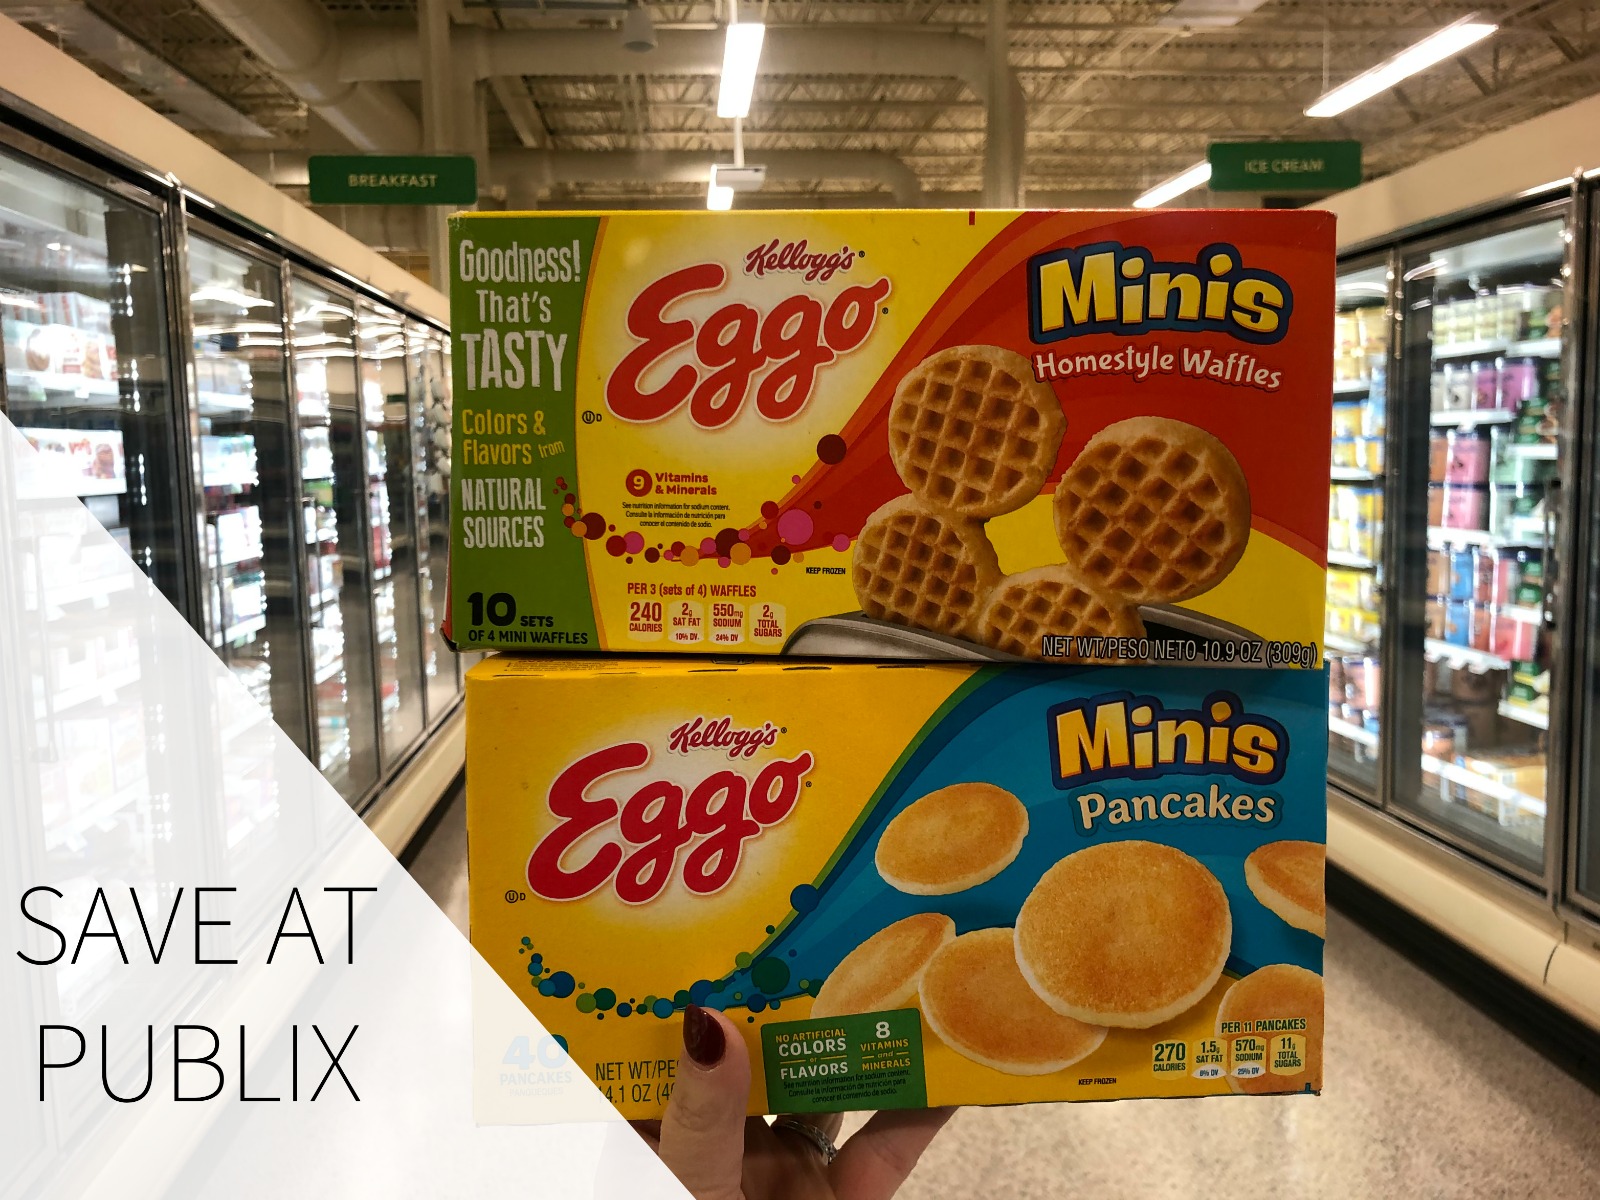 Bring Home Delicious Eggo® Products For Your Family – Save Now At Publix